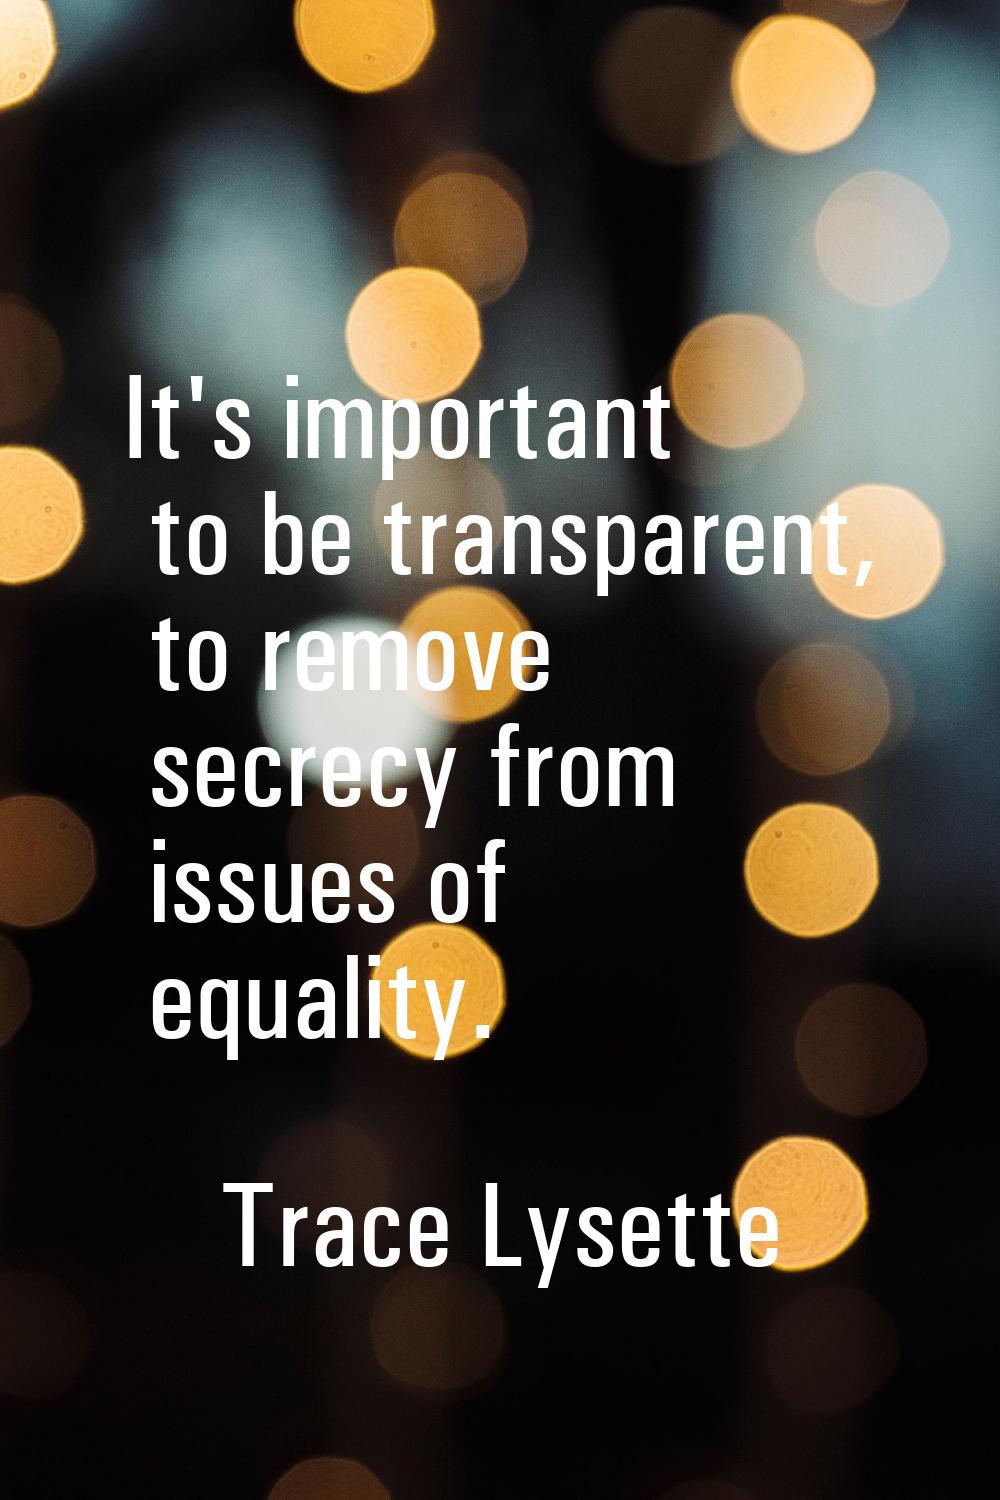 It's important to be transparent, to remove secrecy from issues of equality.